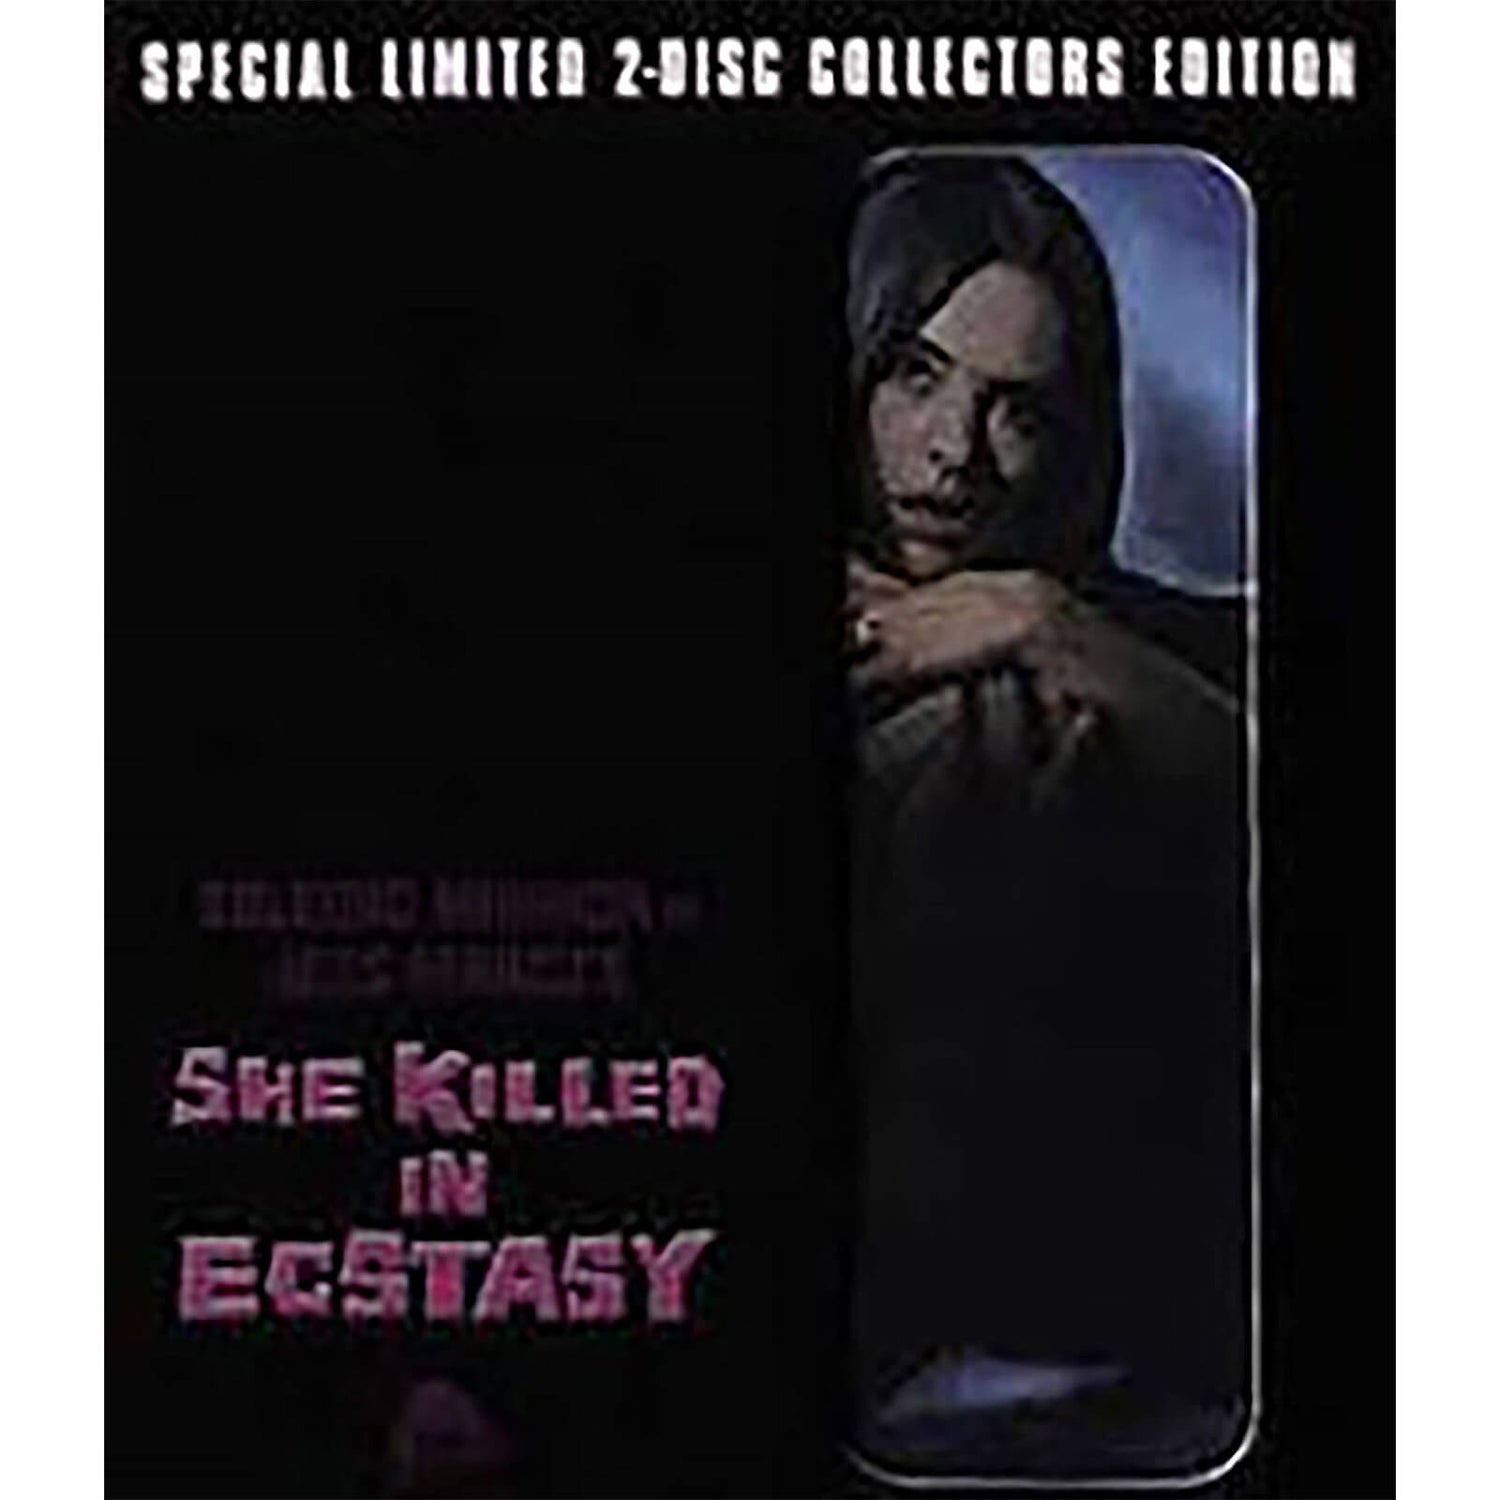 She Killed In Ecstasy (Includes CD)